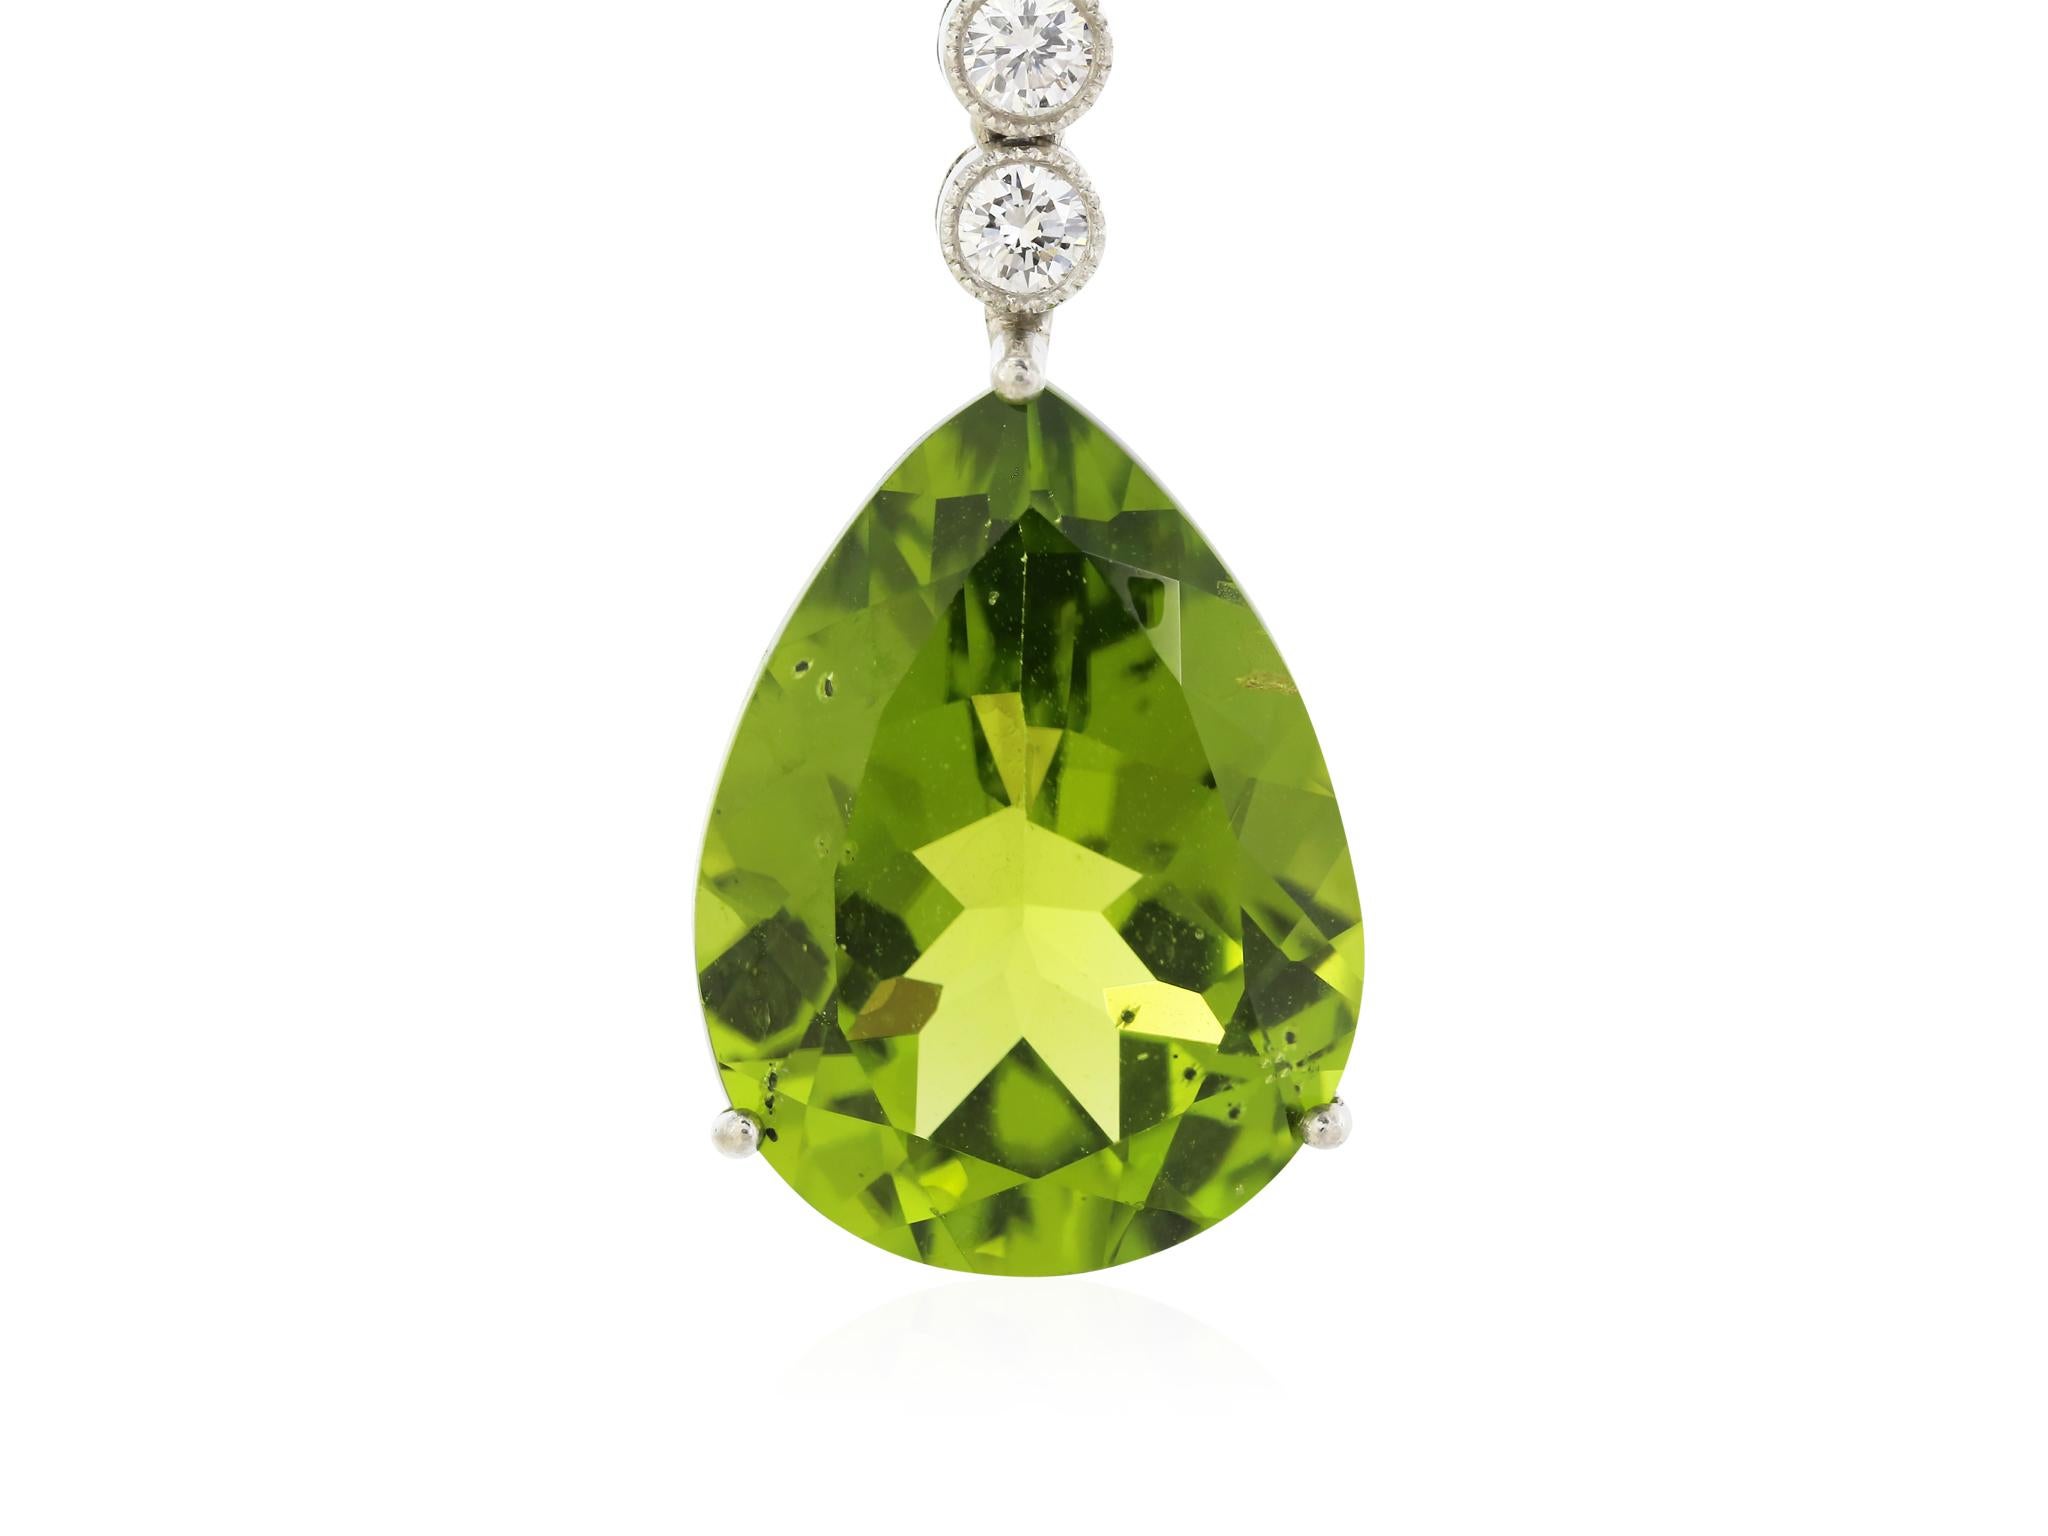 Stunning 18 karat white gold peridot and diamond drop earrings with milgrain detail, featuring two pear shaped peridot's with a total weight of 15.50 carats, accented by a total of 1.60 carats of diamonds and two onyx beads.